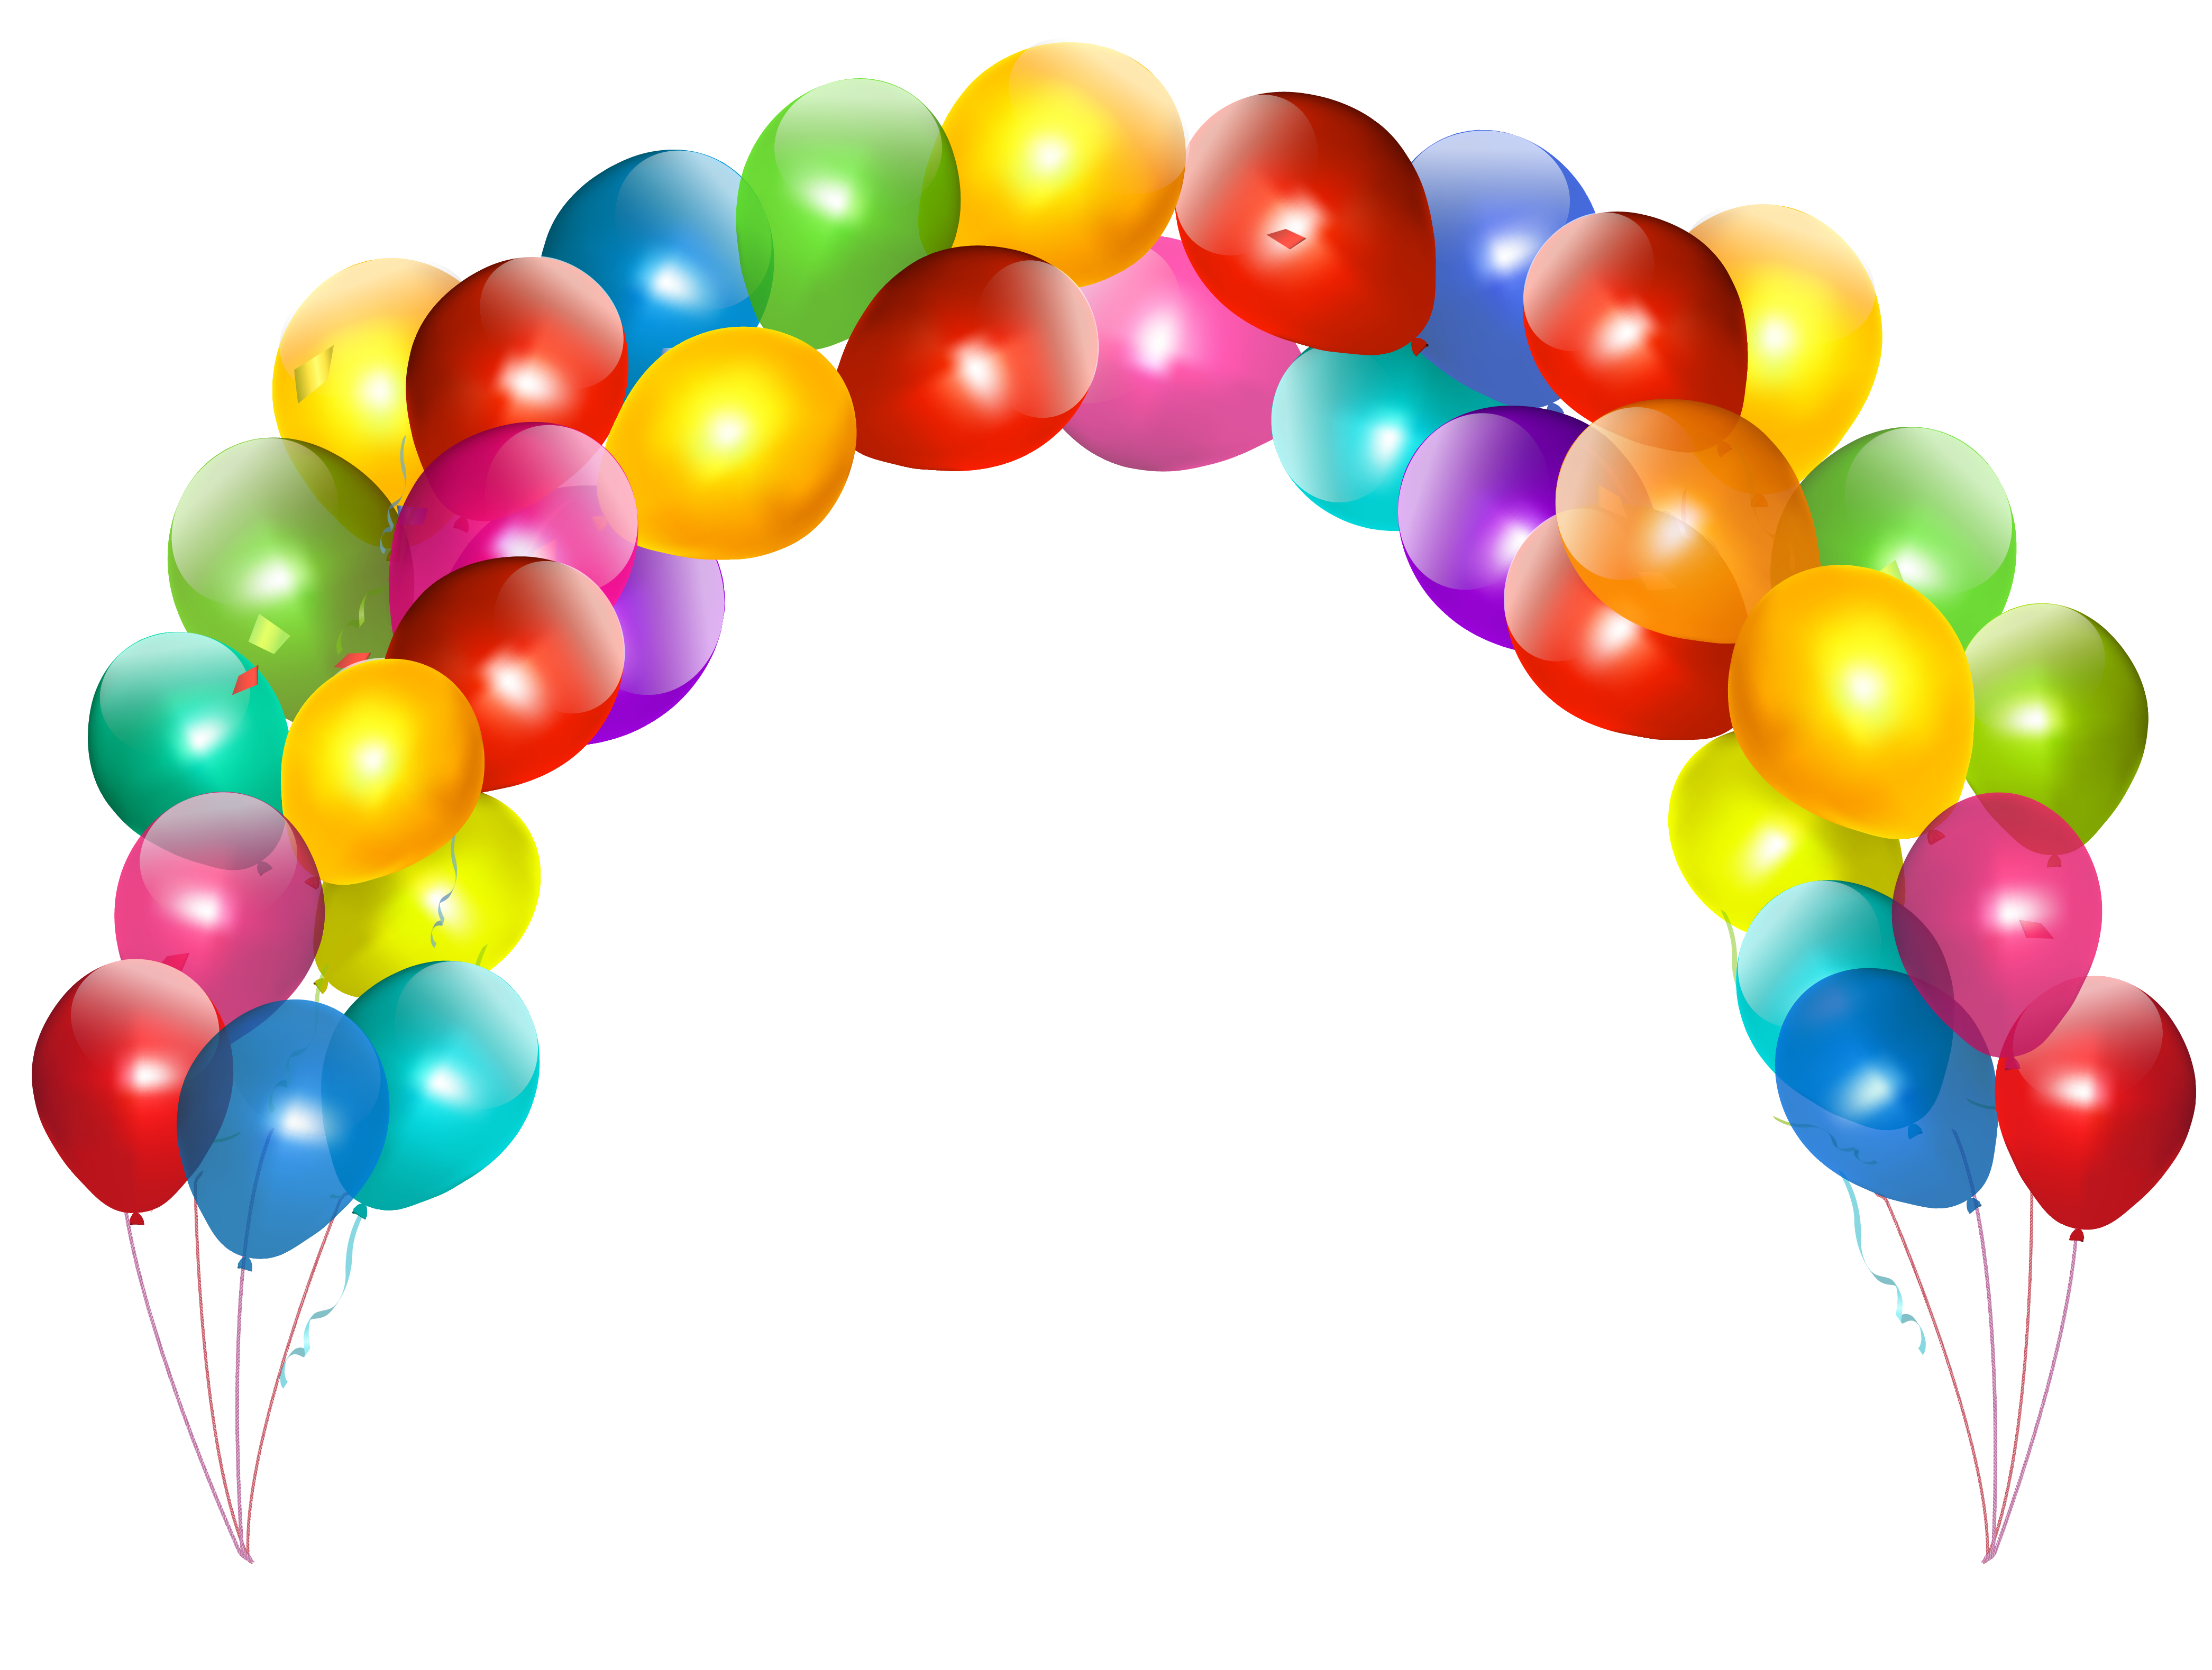 36 Ballon Png Free Cliparts That You Can Download To You Computer And